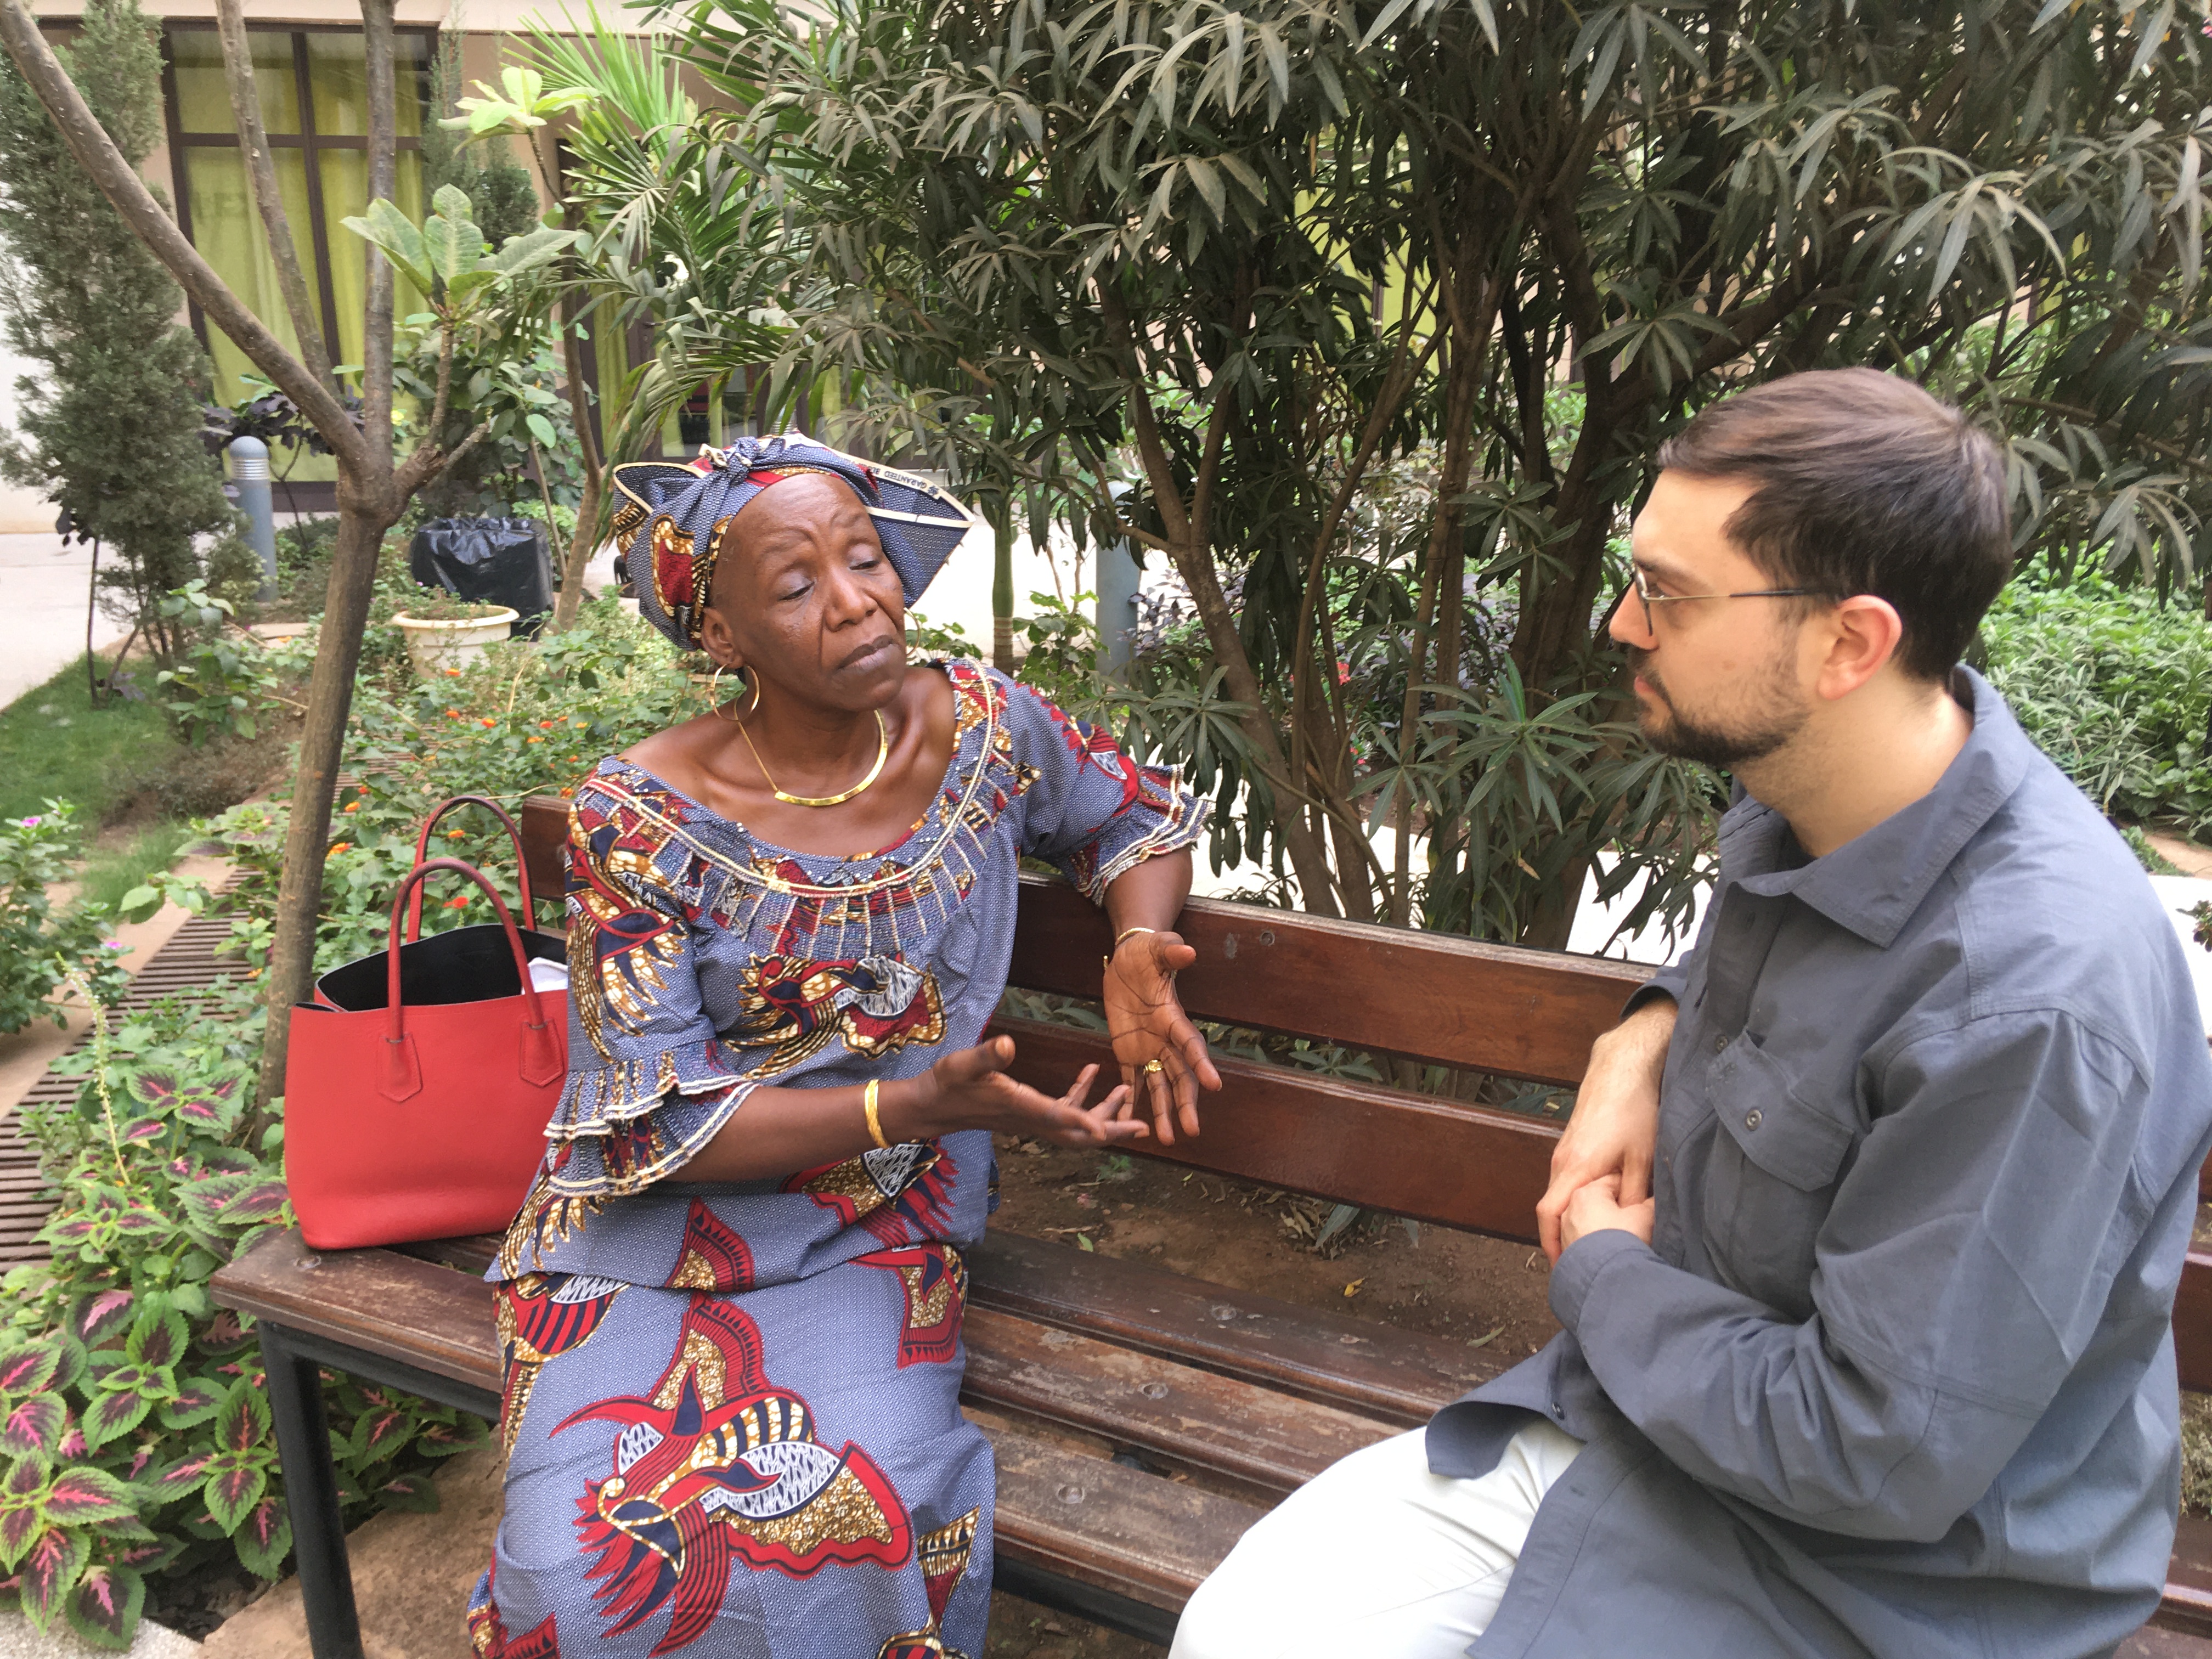 WJP field researcher and ACLS-Mellon Public Fellow Joe Haley converses with Djingarey Maïga, unapologetic feminist and human rights educator.